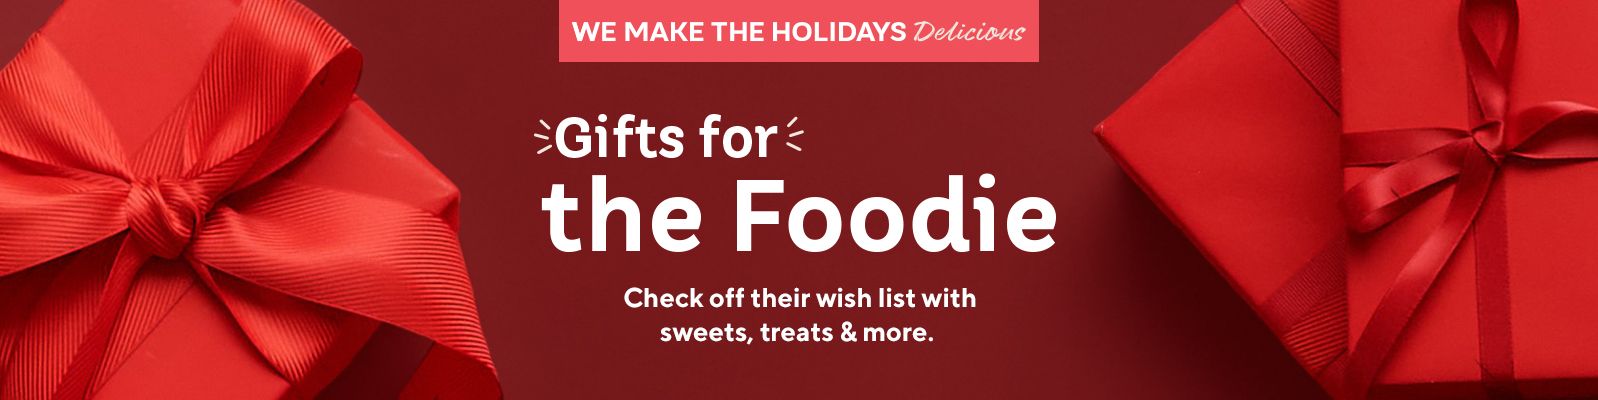 Gifts for the Foodie  Check off their wish list with sweets, treats & more. 